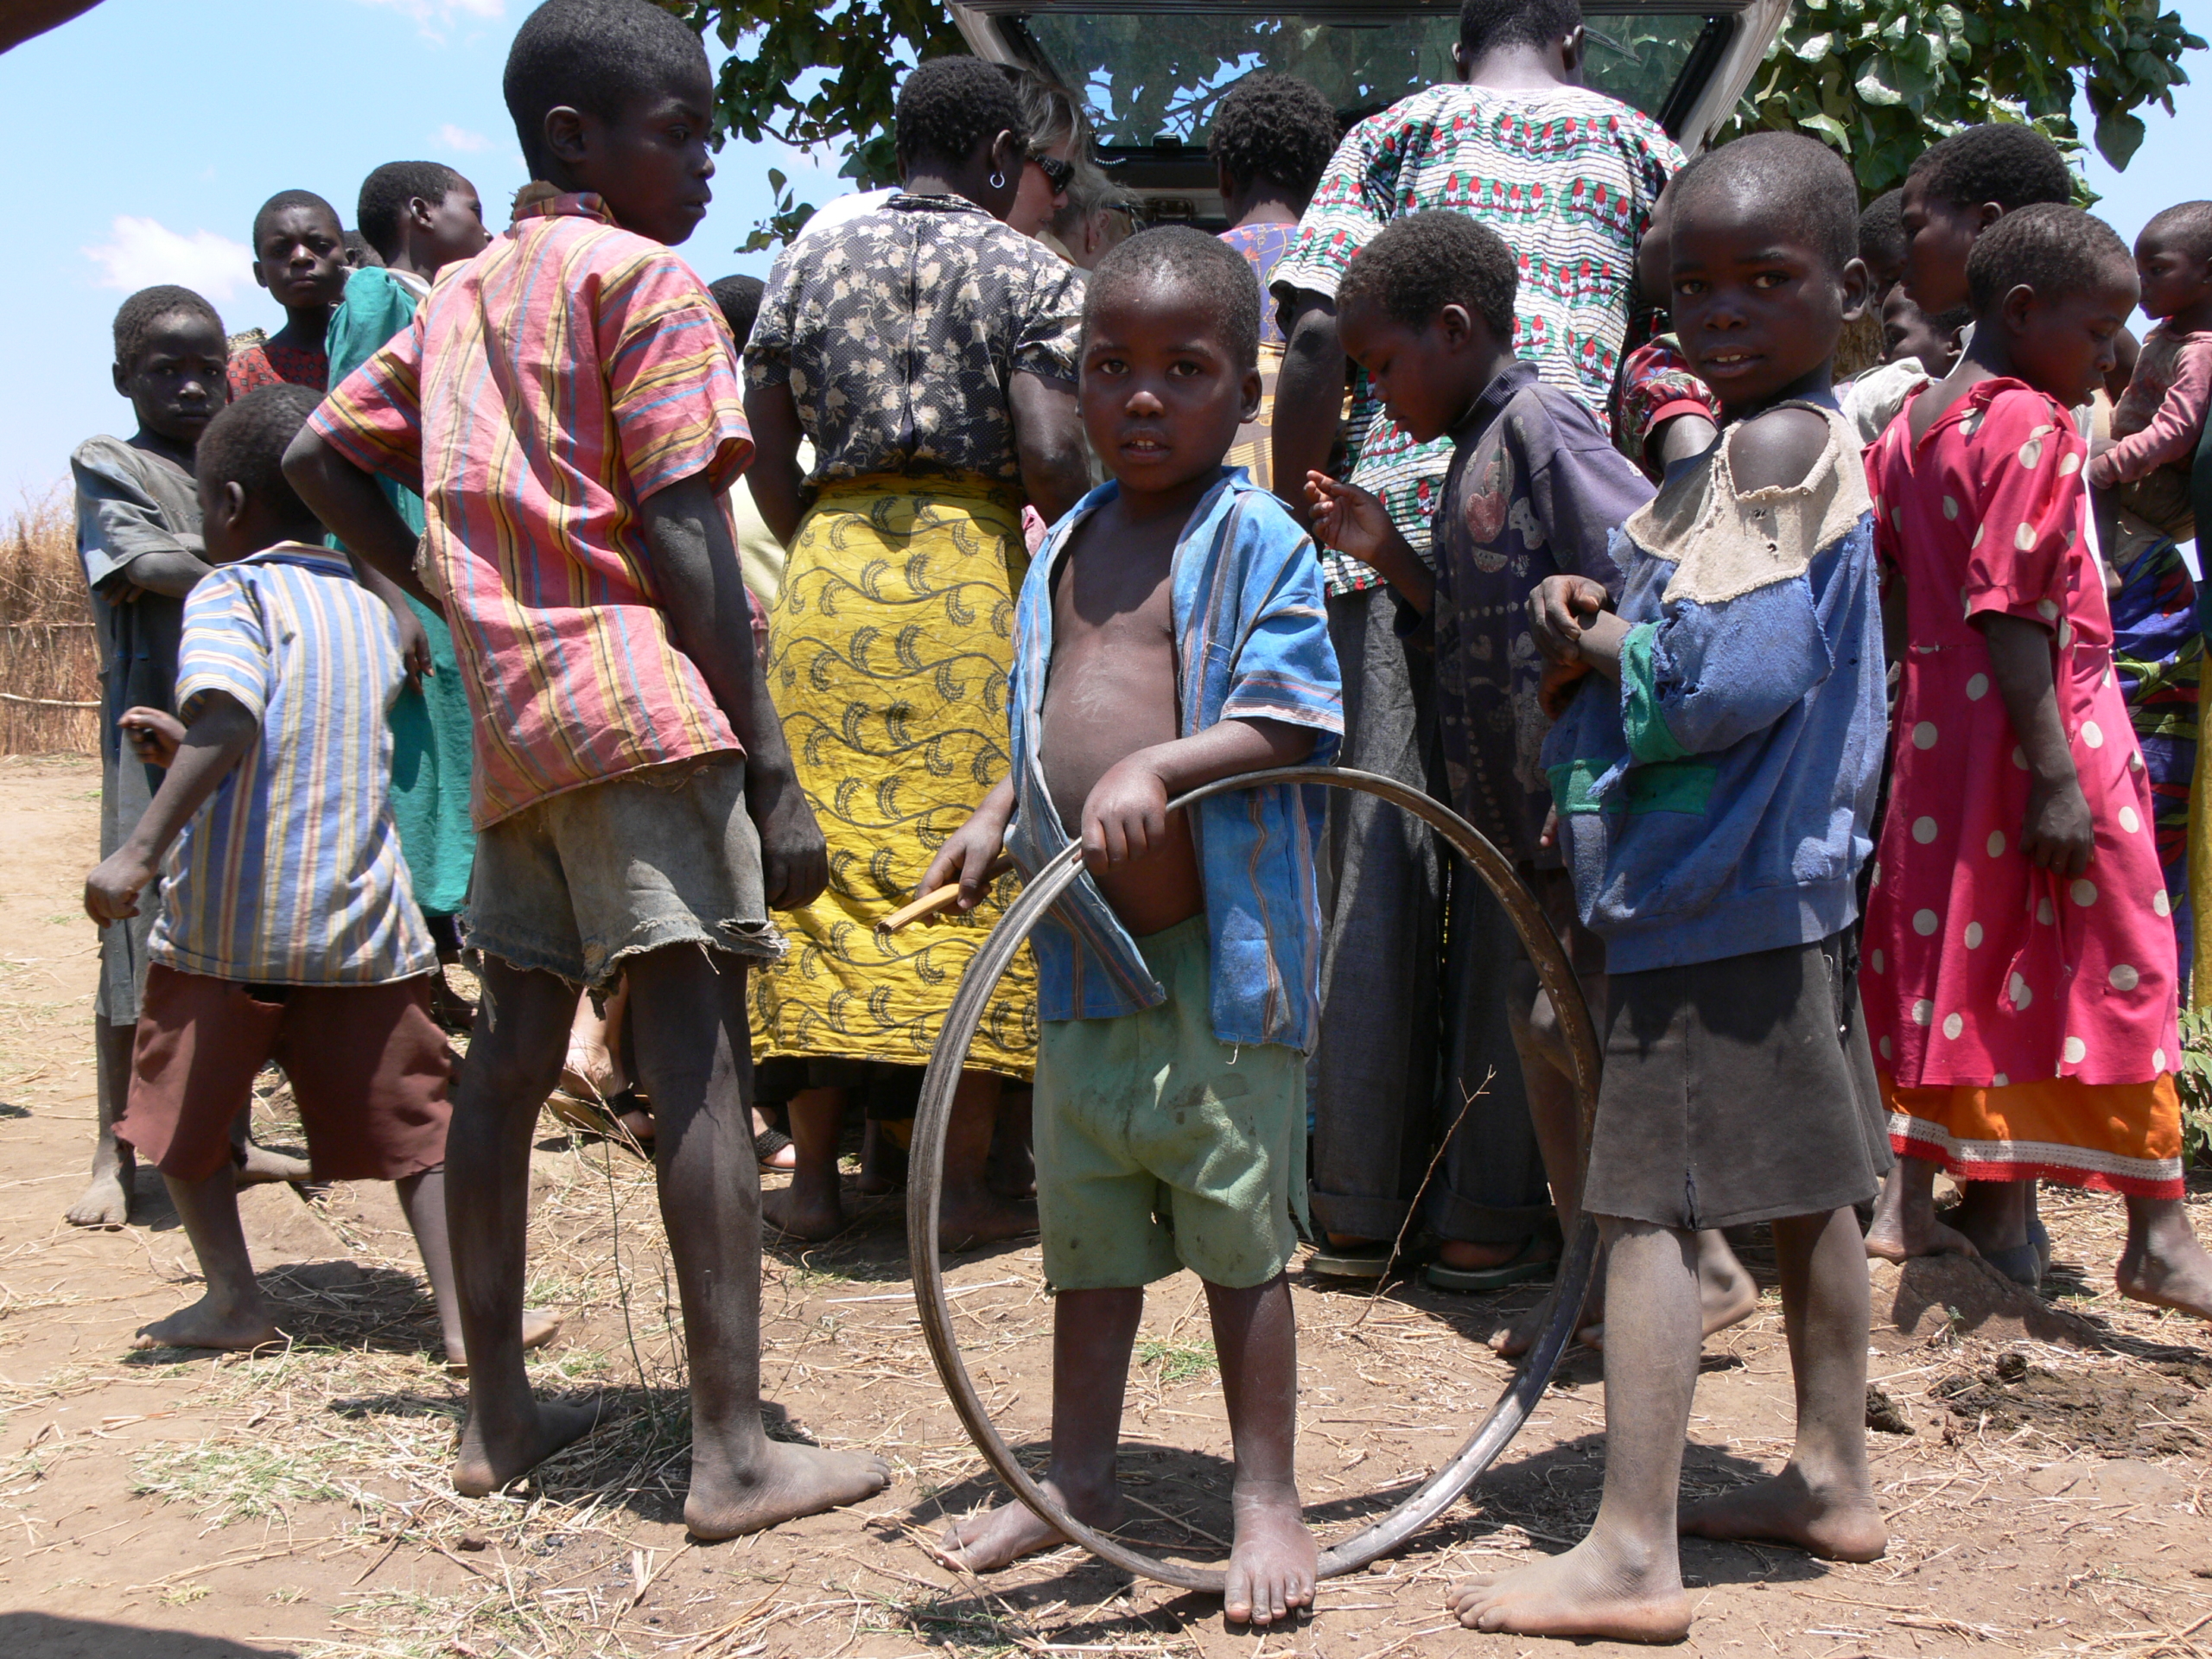 Poverty in Malawi